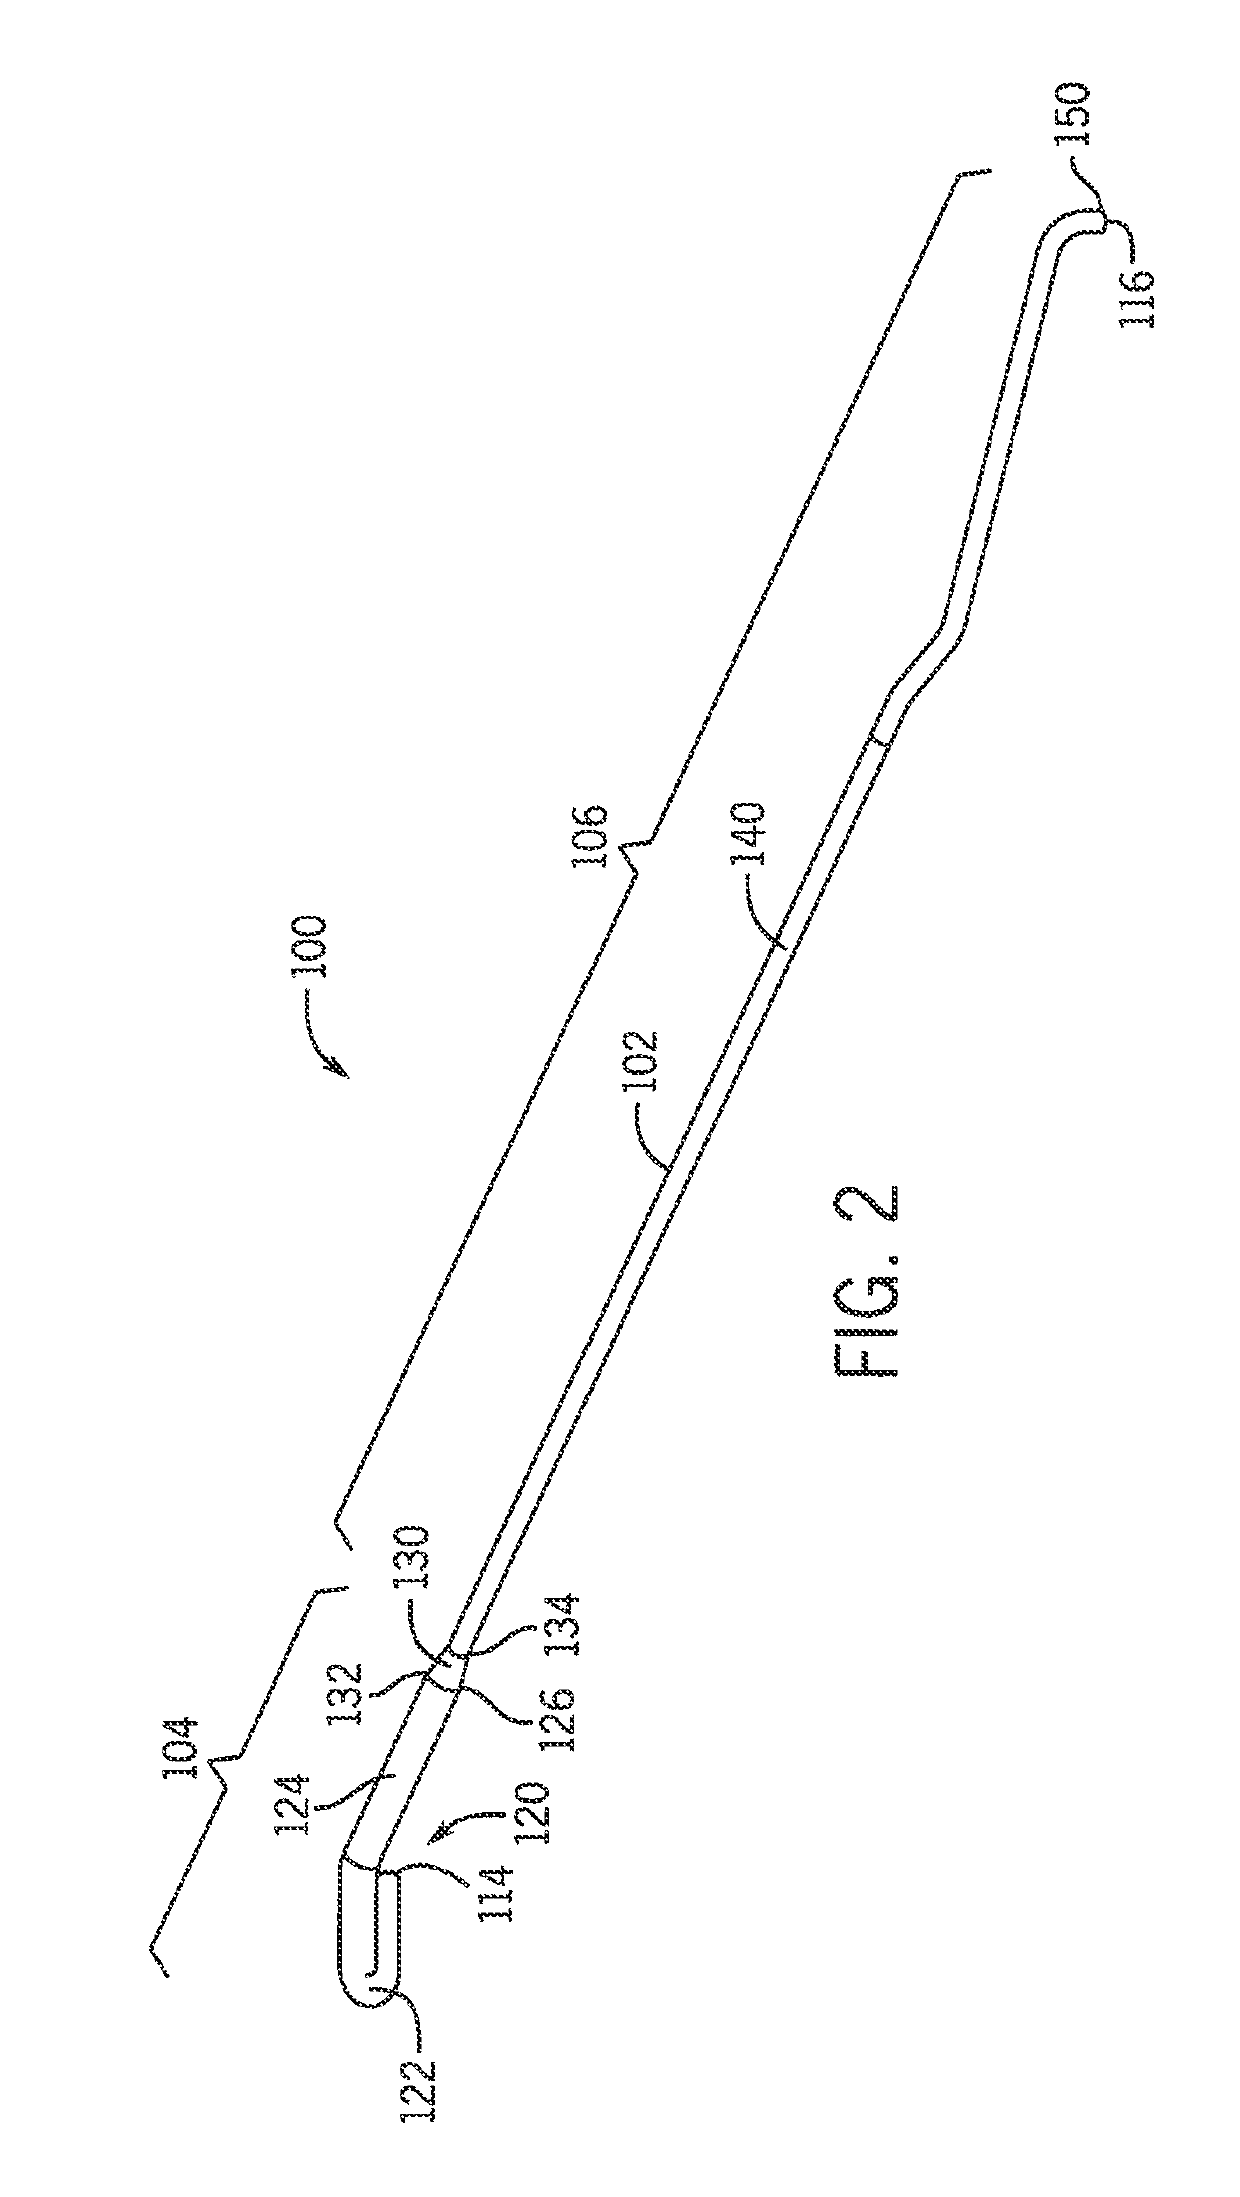 System and method for use of flexible anti-reflux ureteral stent